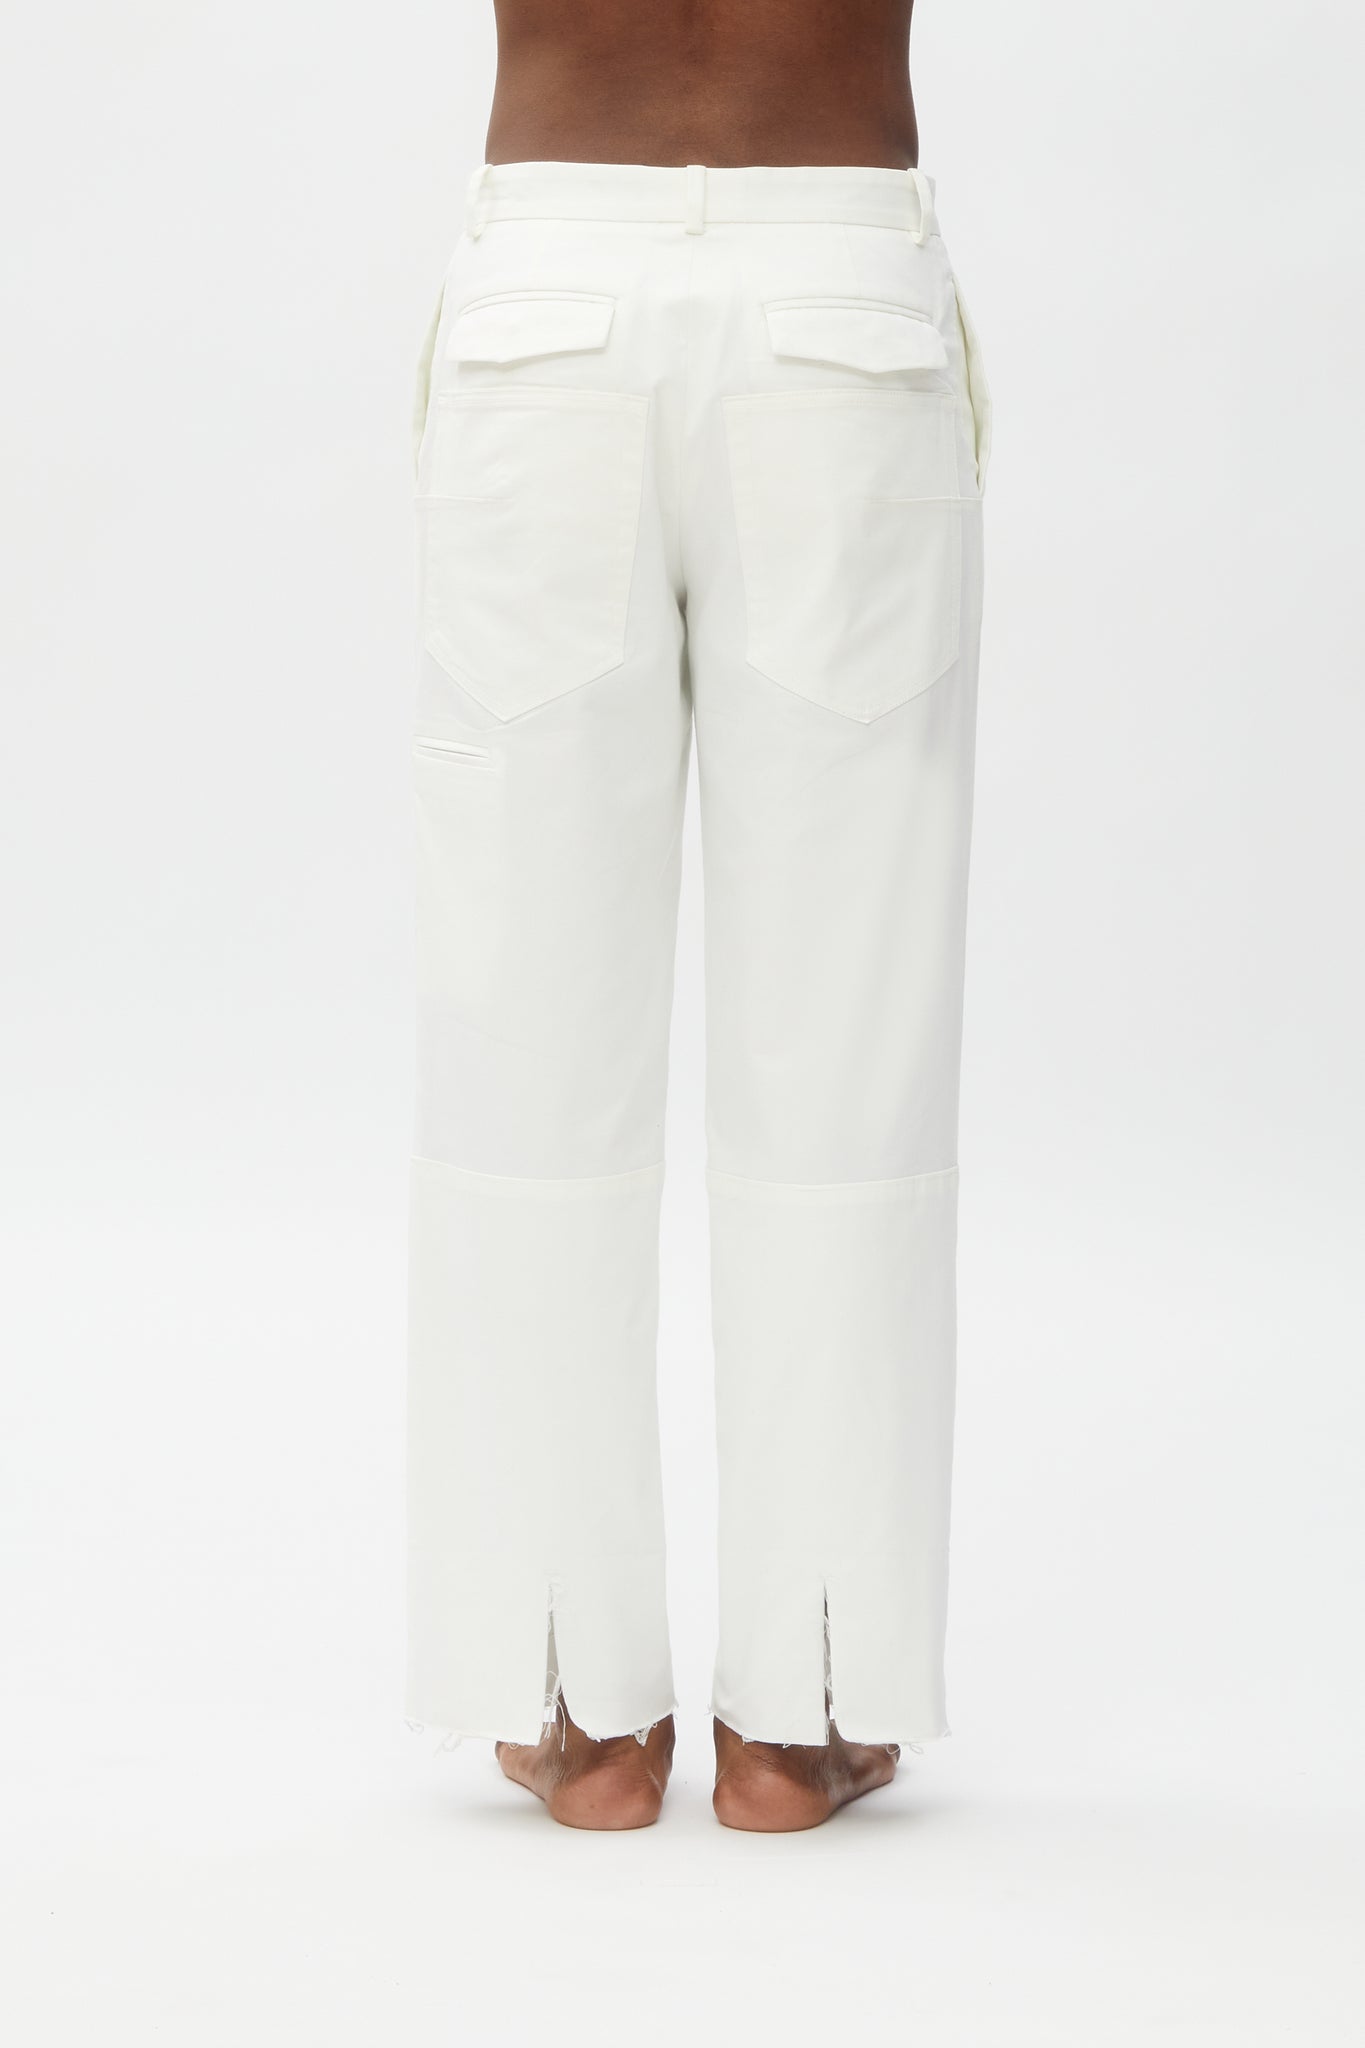 Eggshell "Ayan" Trousers